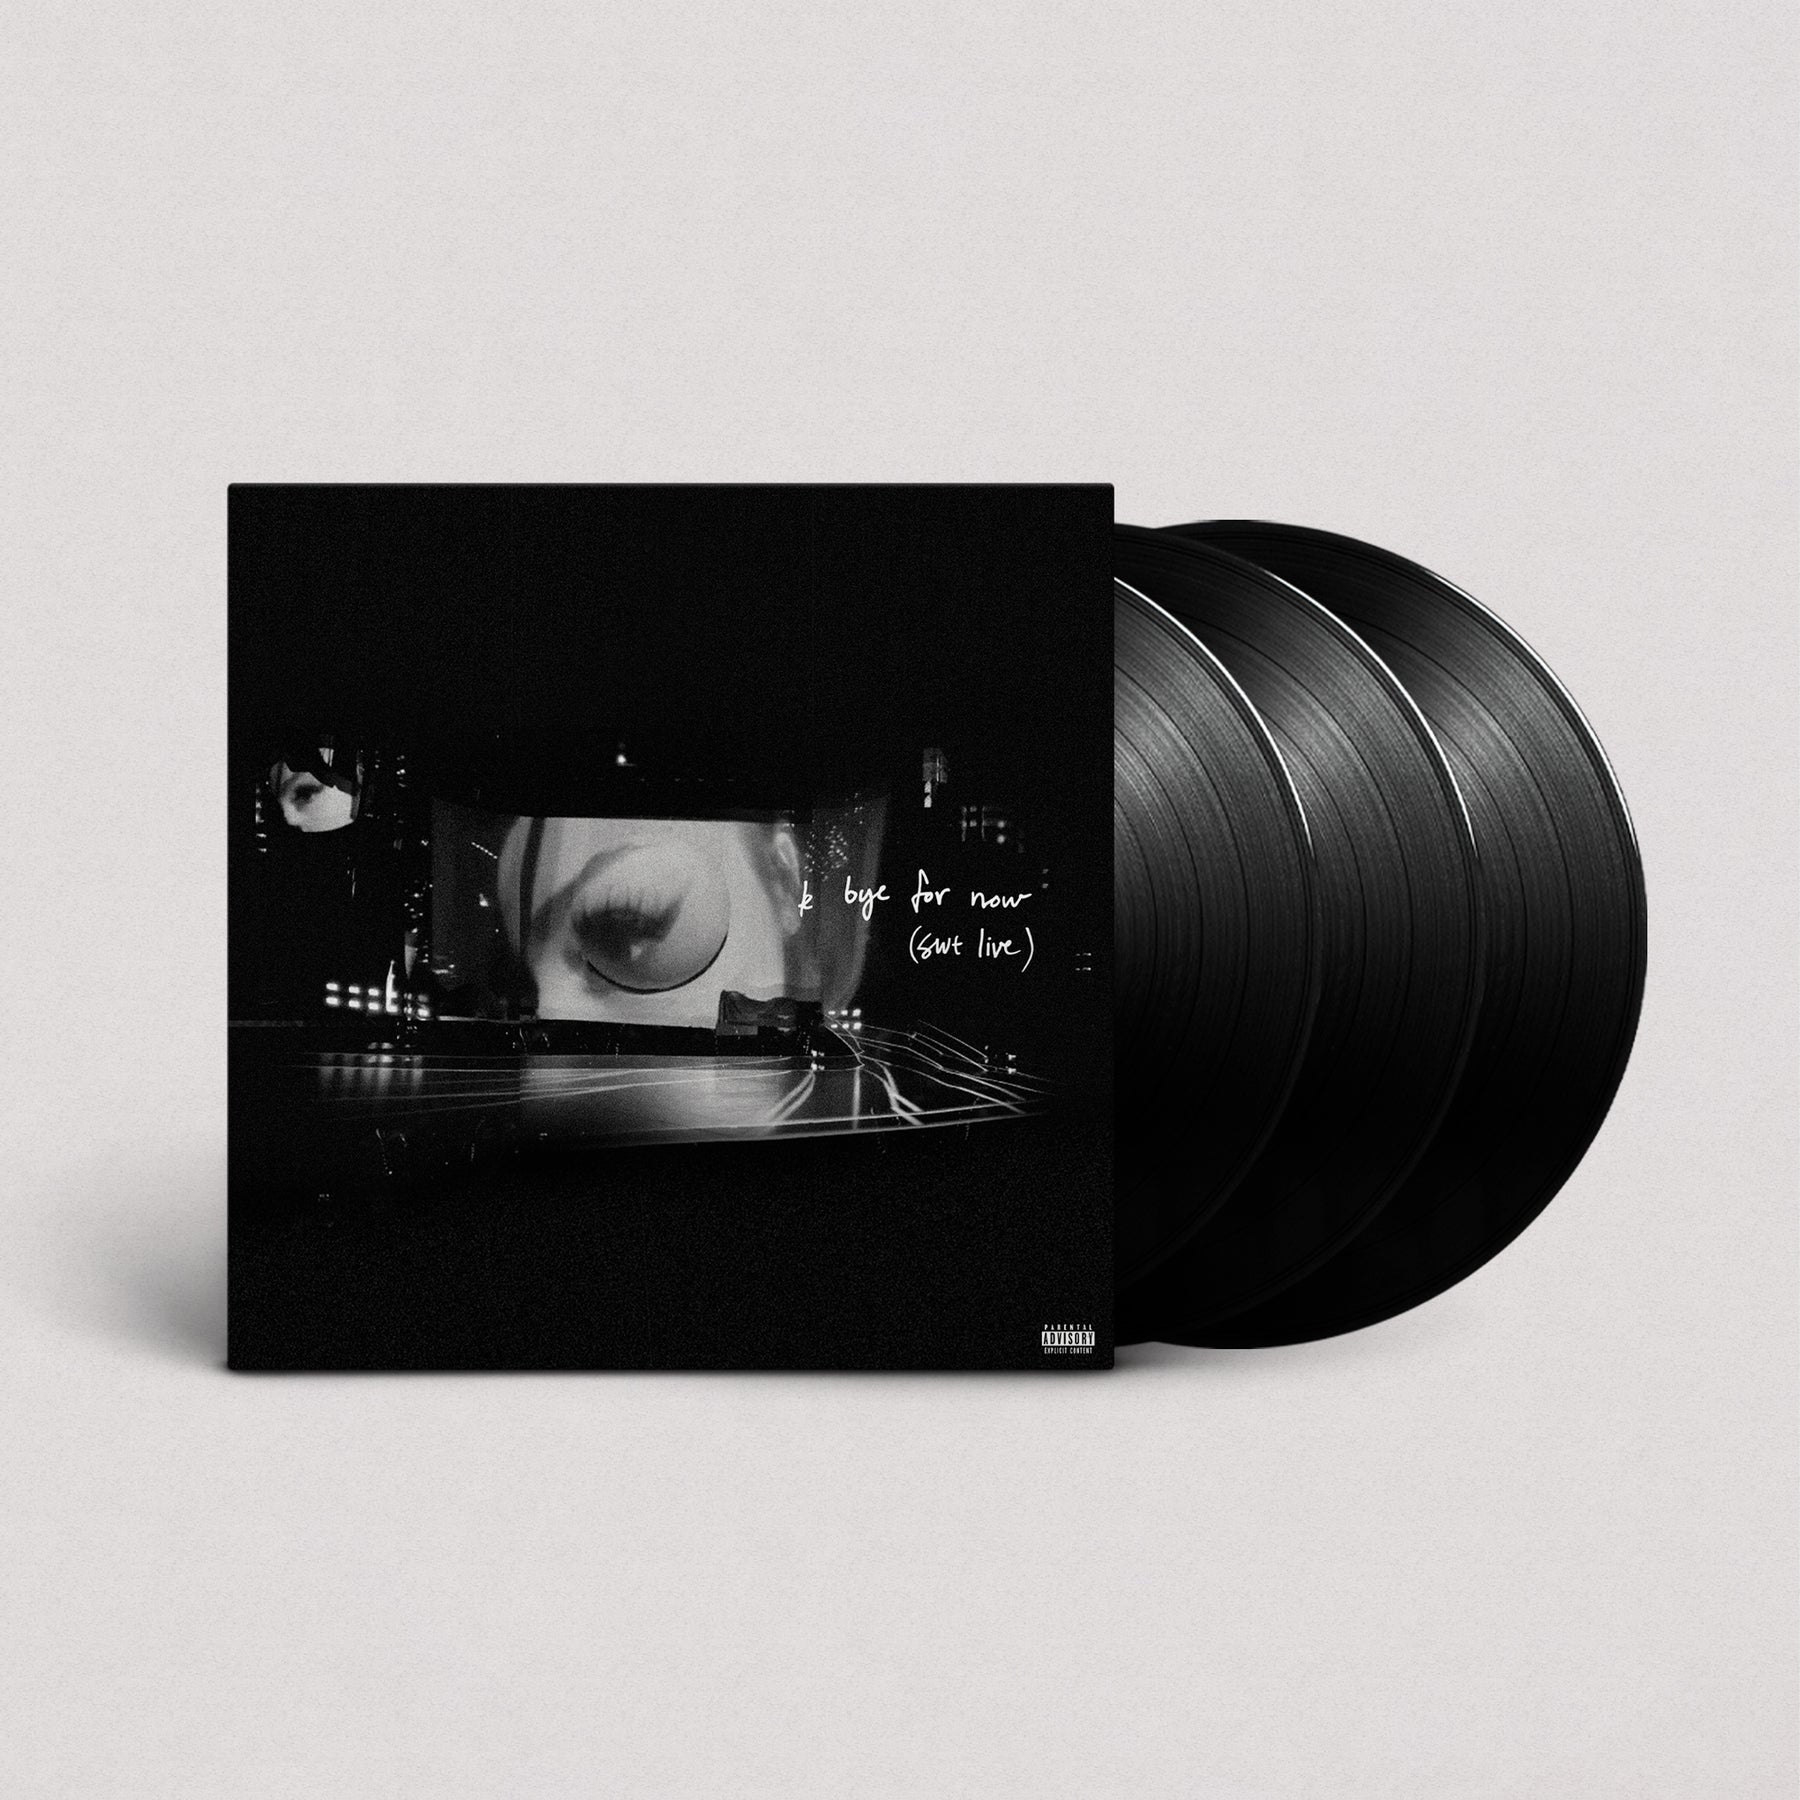 Ariana Grande - k bye for now (swt live) (RSD Exclusive , Vinilo 3'LP)